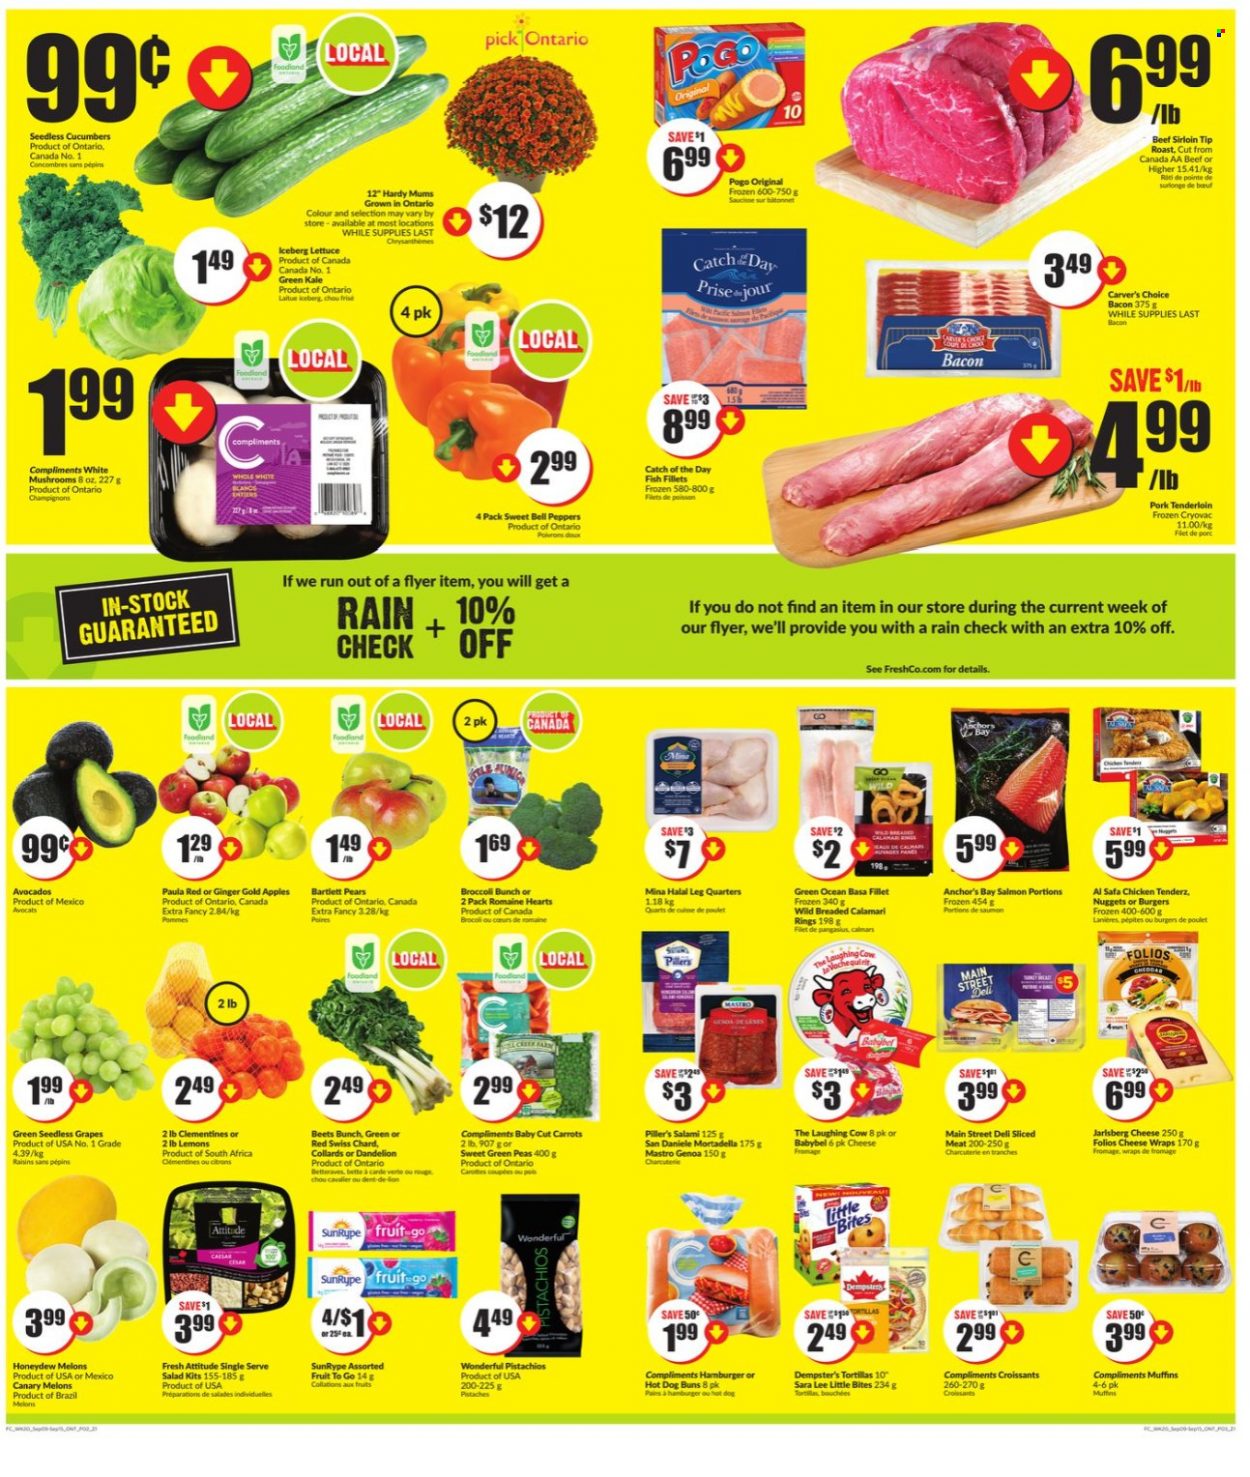 thumbnail - FreshCo. Flyer - September 09, 2021 - September 15, 2021 - Sales products - mushrooms, tortillas, croissant, buns, Sara Lee, wraps, muffin, bell peppers, carrots, cucumber, ginger, peas, lettuce, salad, peppers, apples, Bartlett pears, clementines, grapes, seedless grapes, honeydew, pears, melons, calamari, fish fillets, salmon, fish, nuggets, bacon, mortadella, salami, cheese, The Laughing Cow, Babybel, Anchor, Little Bites, pistachios, beef meat, beef sirloin, pork meat, pork tenderloin. Page 2.